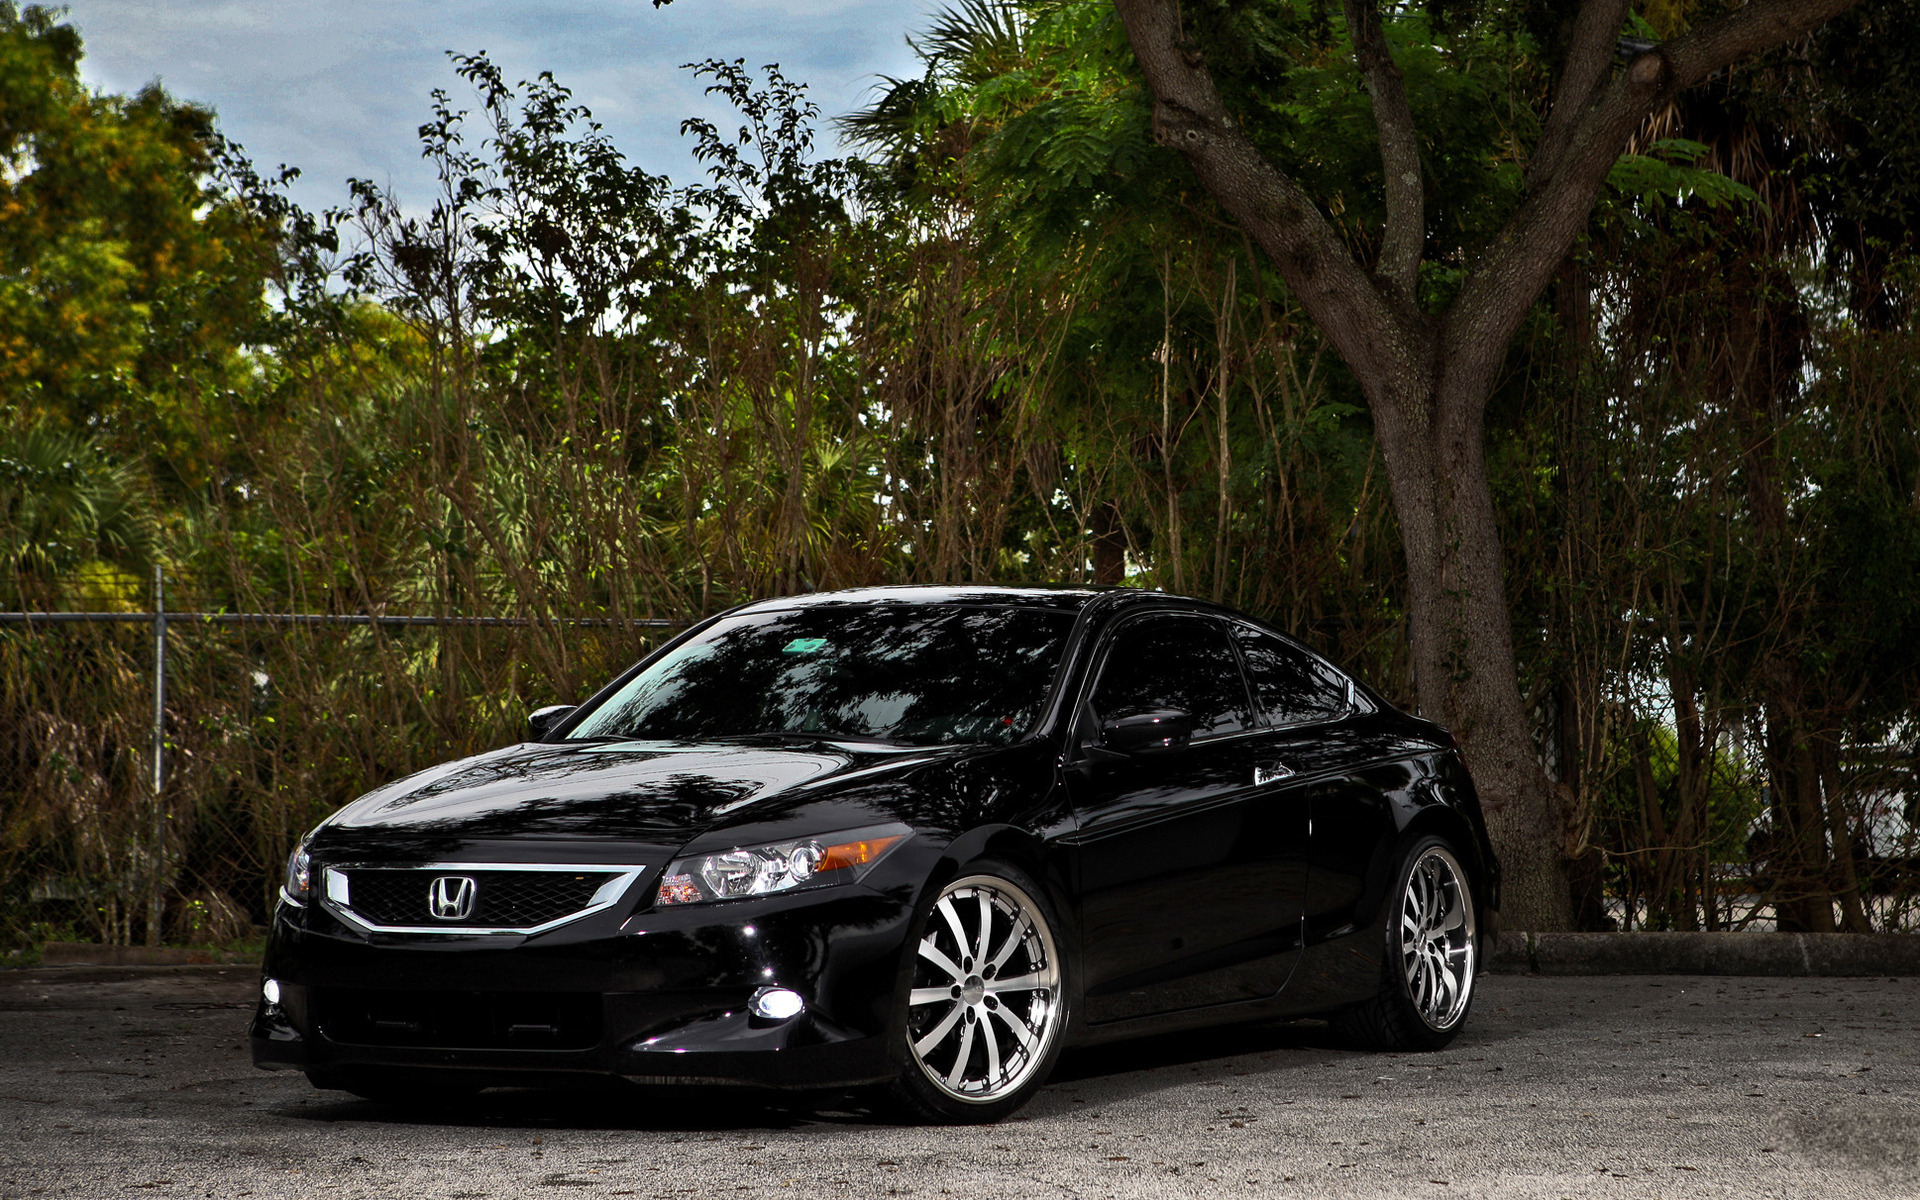 Honda Accord Wallpapers And Images Wallpapers Pictures Photos